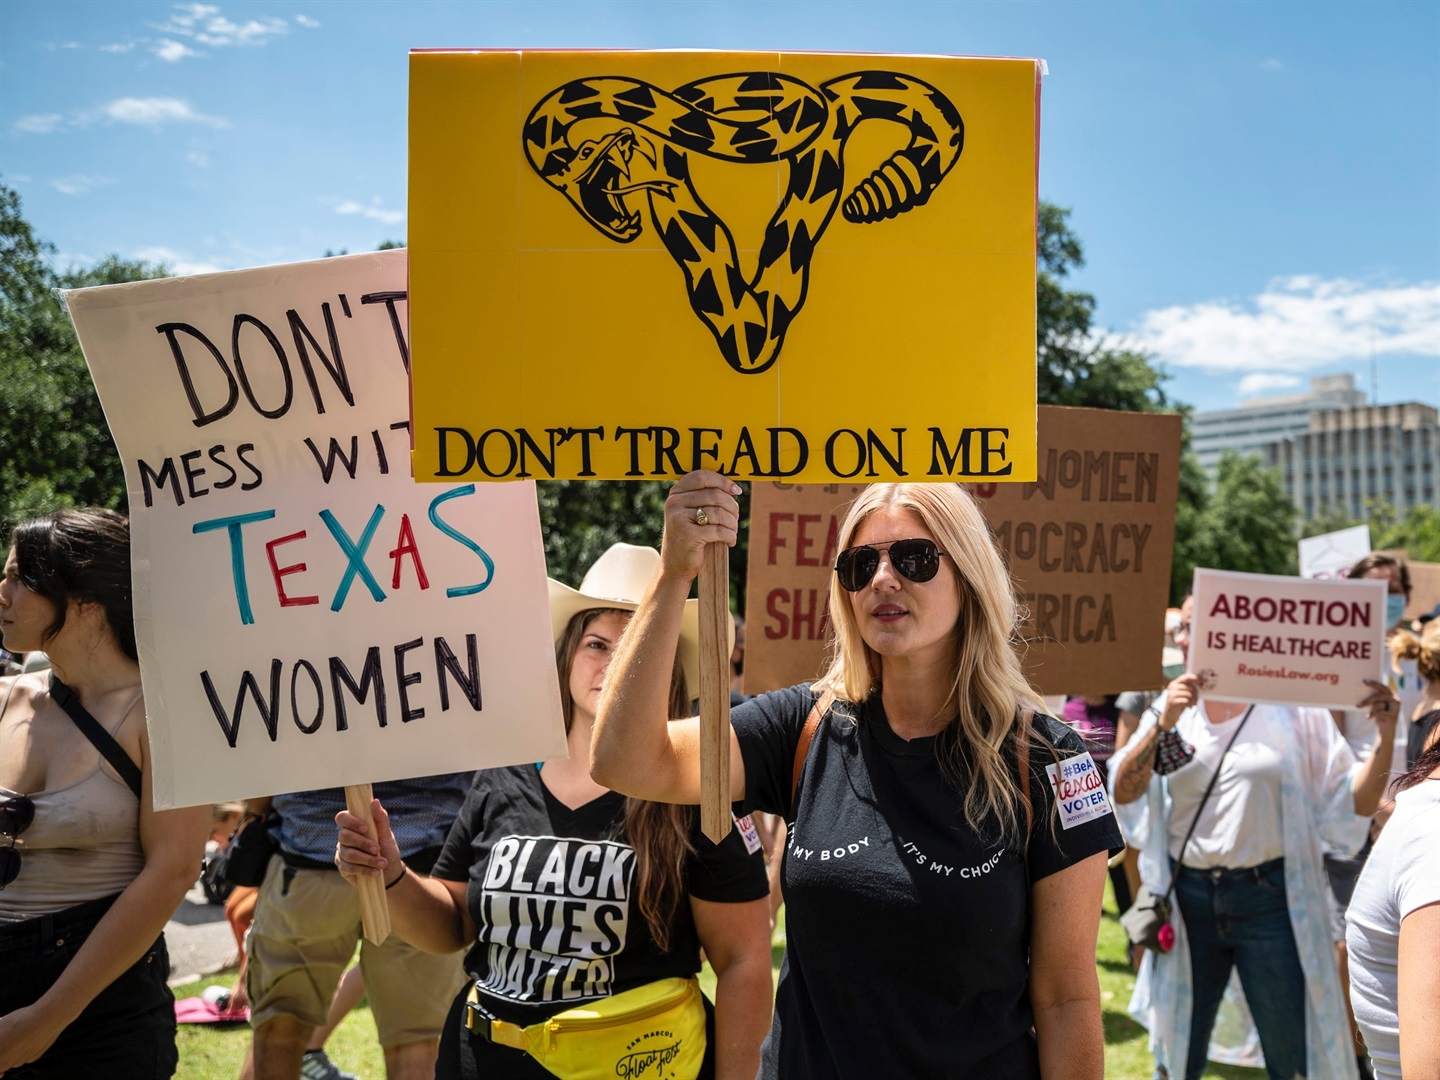 louisiana-lawmakers-withdraw-bill-declaring-abortion-homicide-news24